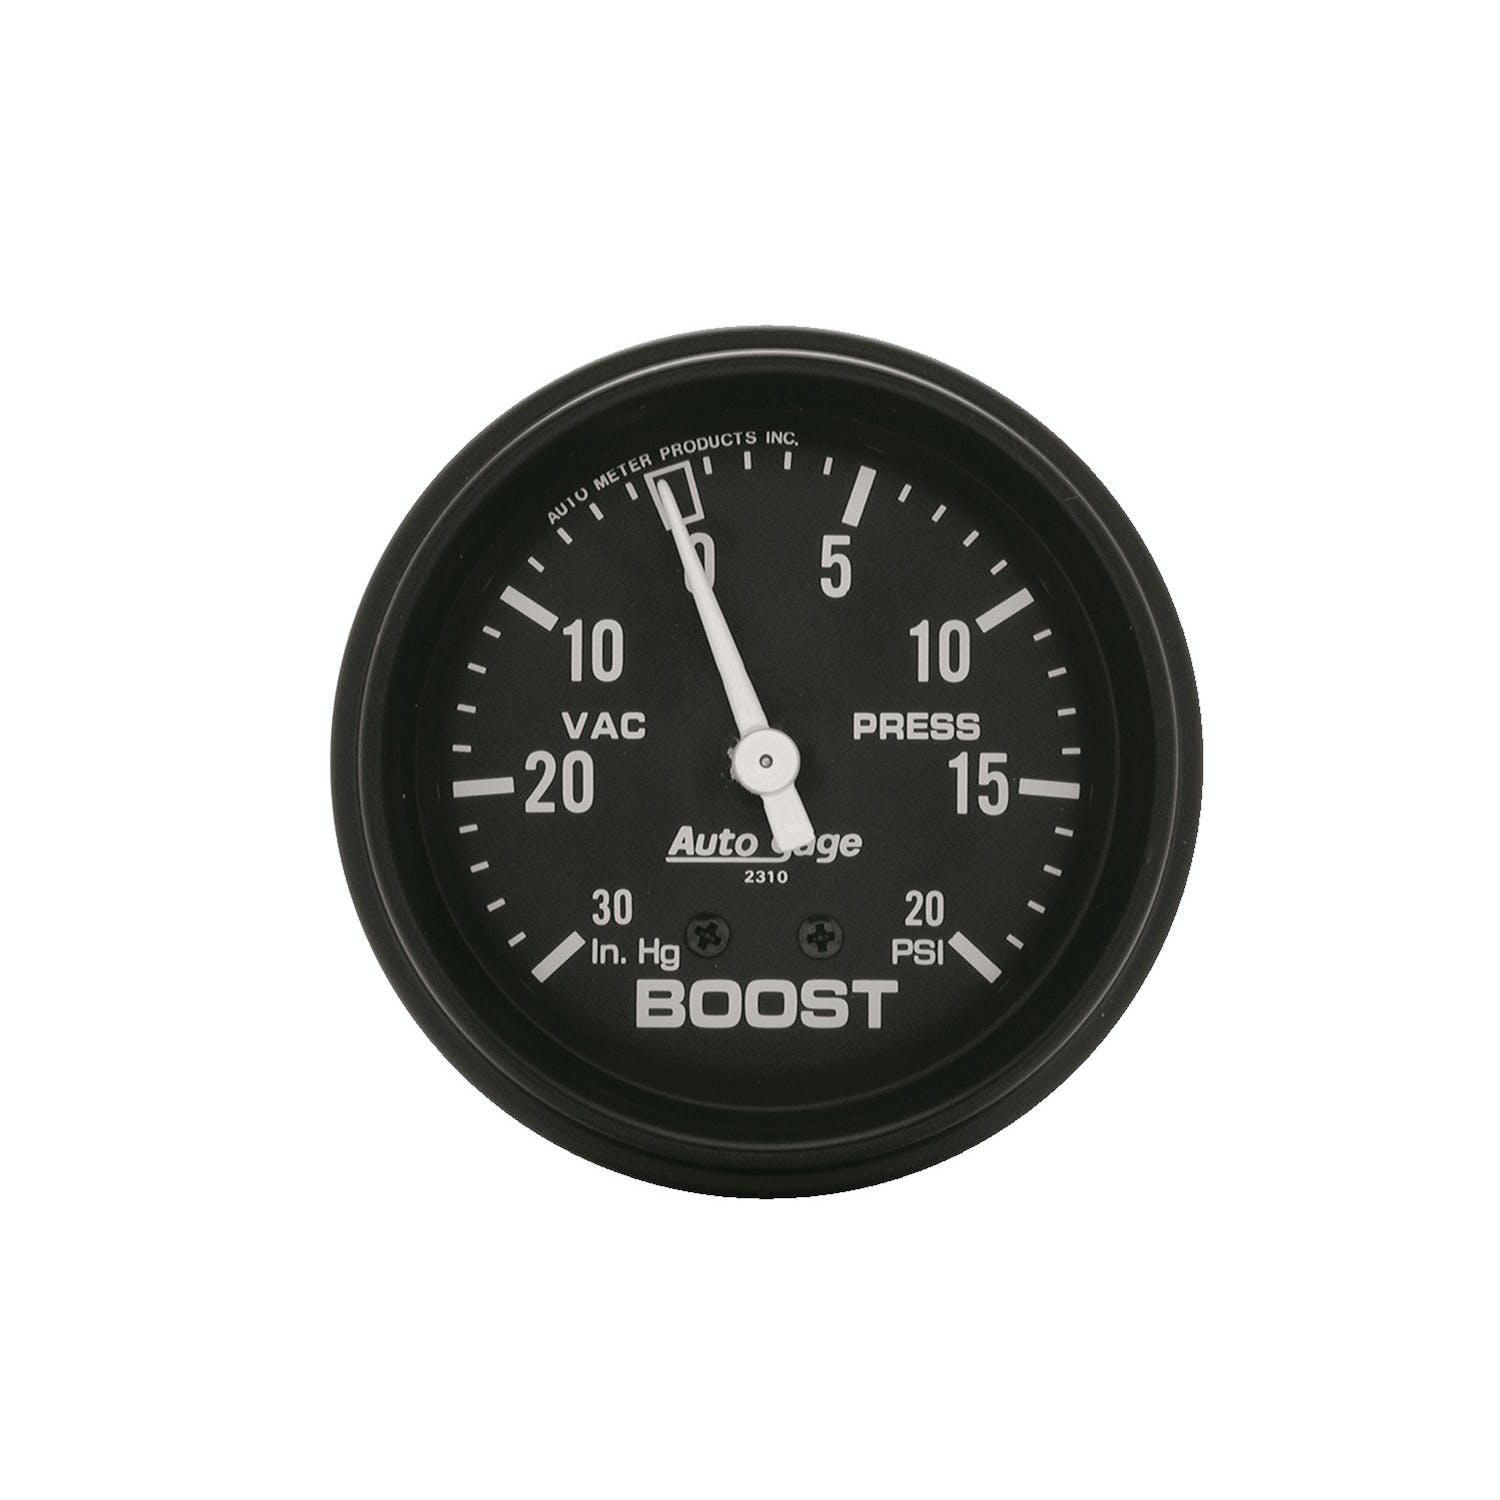 AutoMeter Products 2310 Boost/Vaccuum Gauge 30 In. Hg/30 PSI